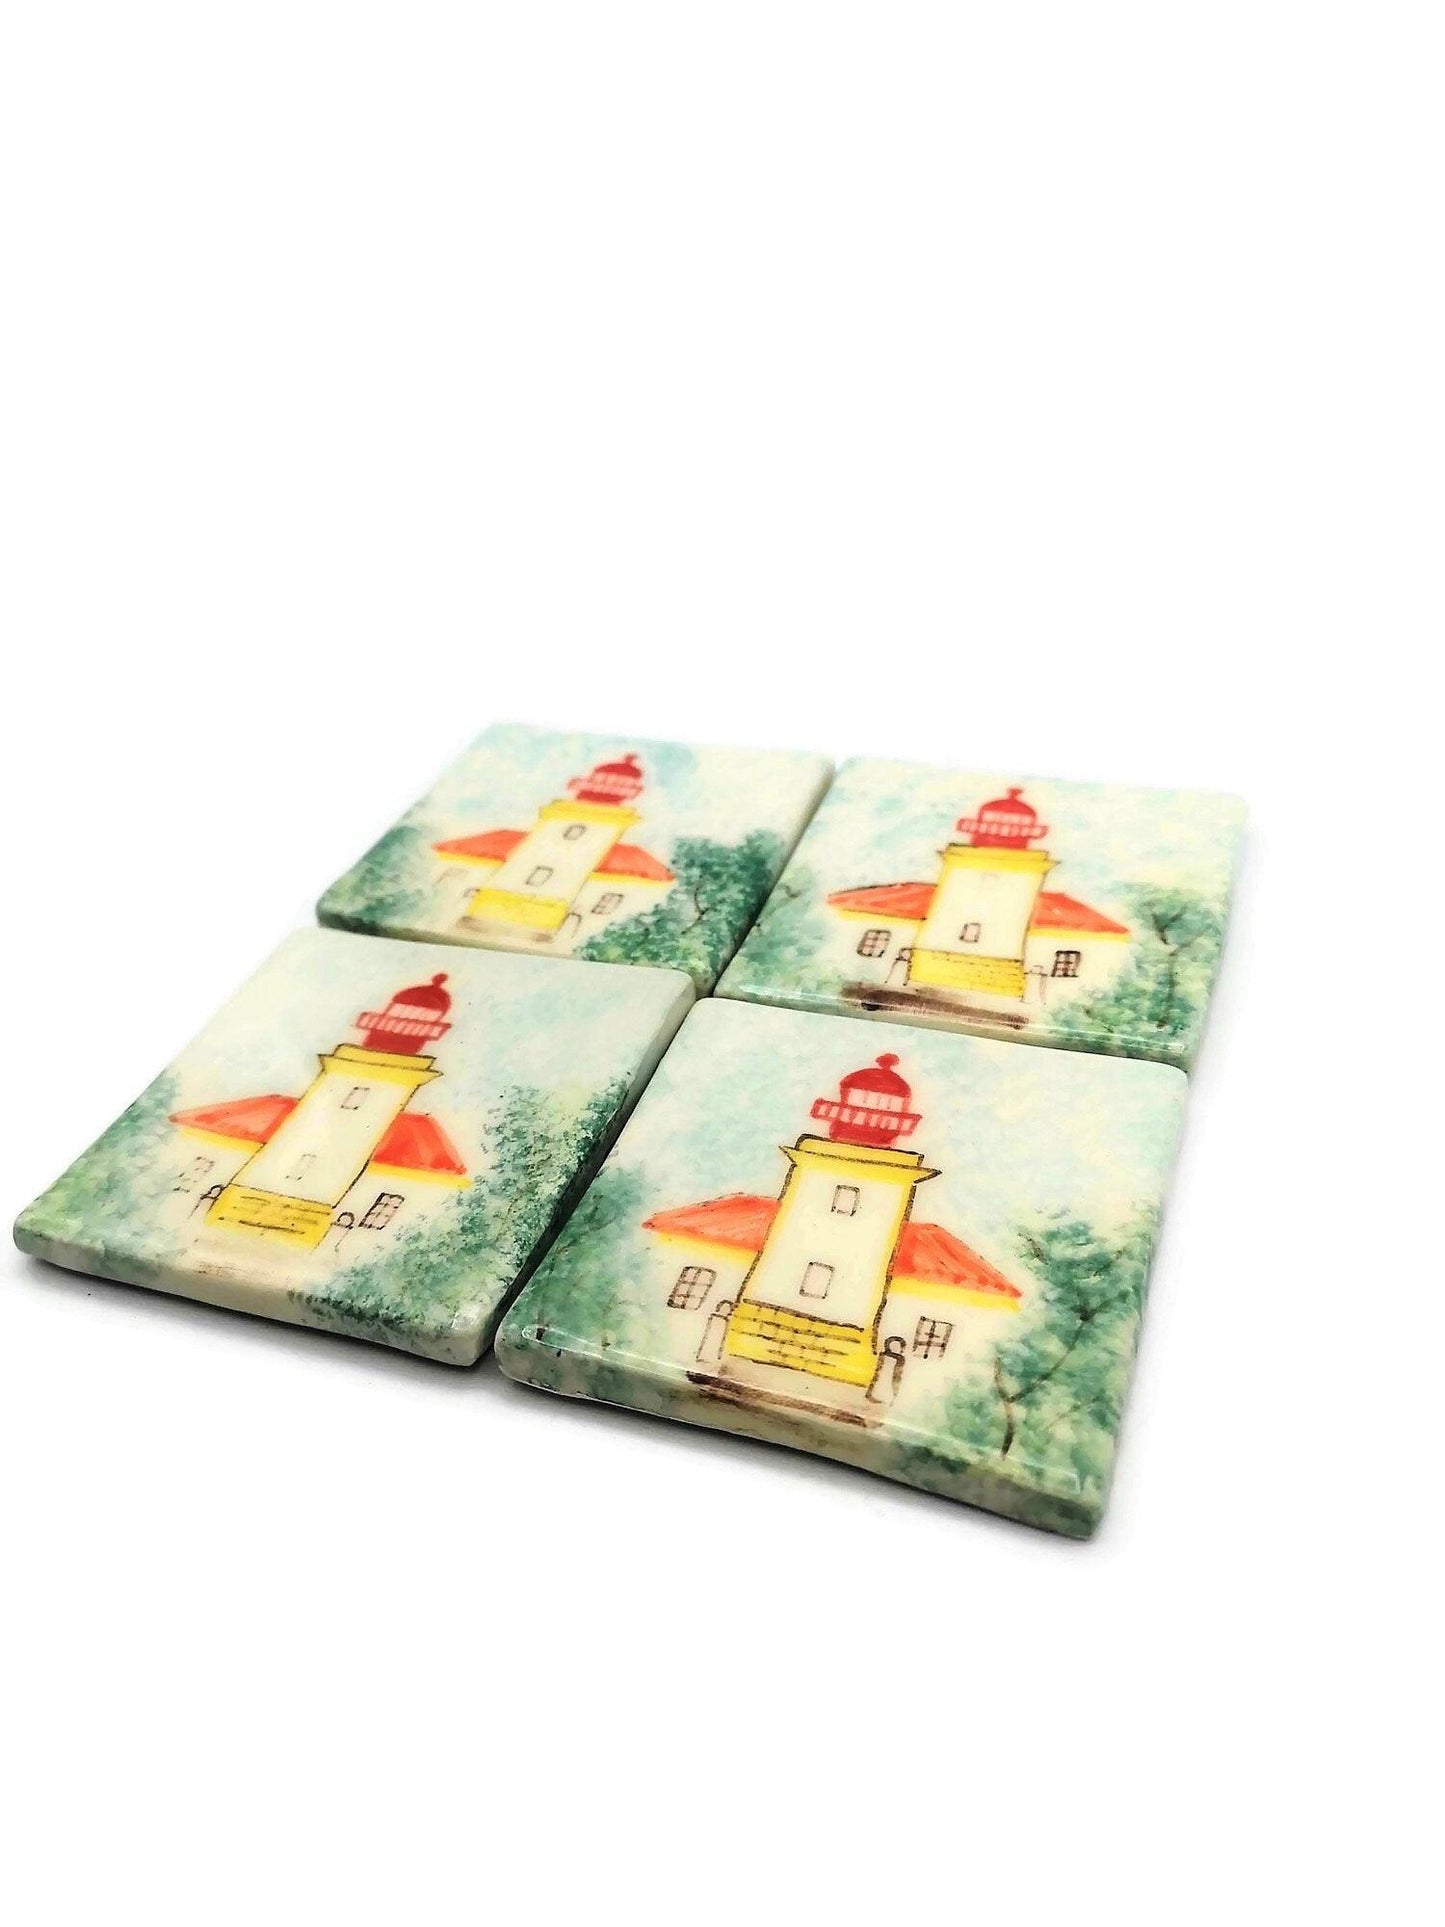 1Pc Hand Painted Lighthouse Small Ceramic Tile Wall Art, Decorative Mosaic Tiles For Backsplash, Unique Gifts For Him - Ceramica Ana Rafael